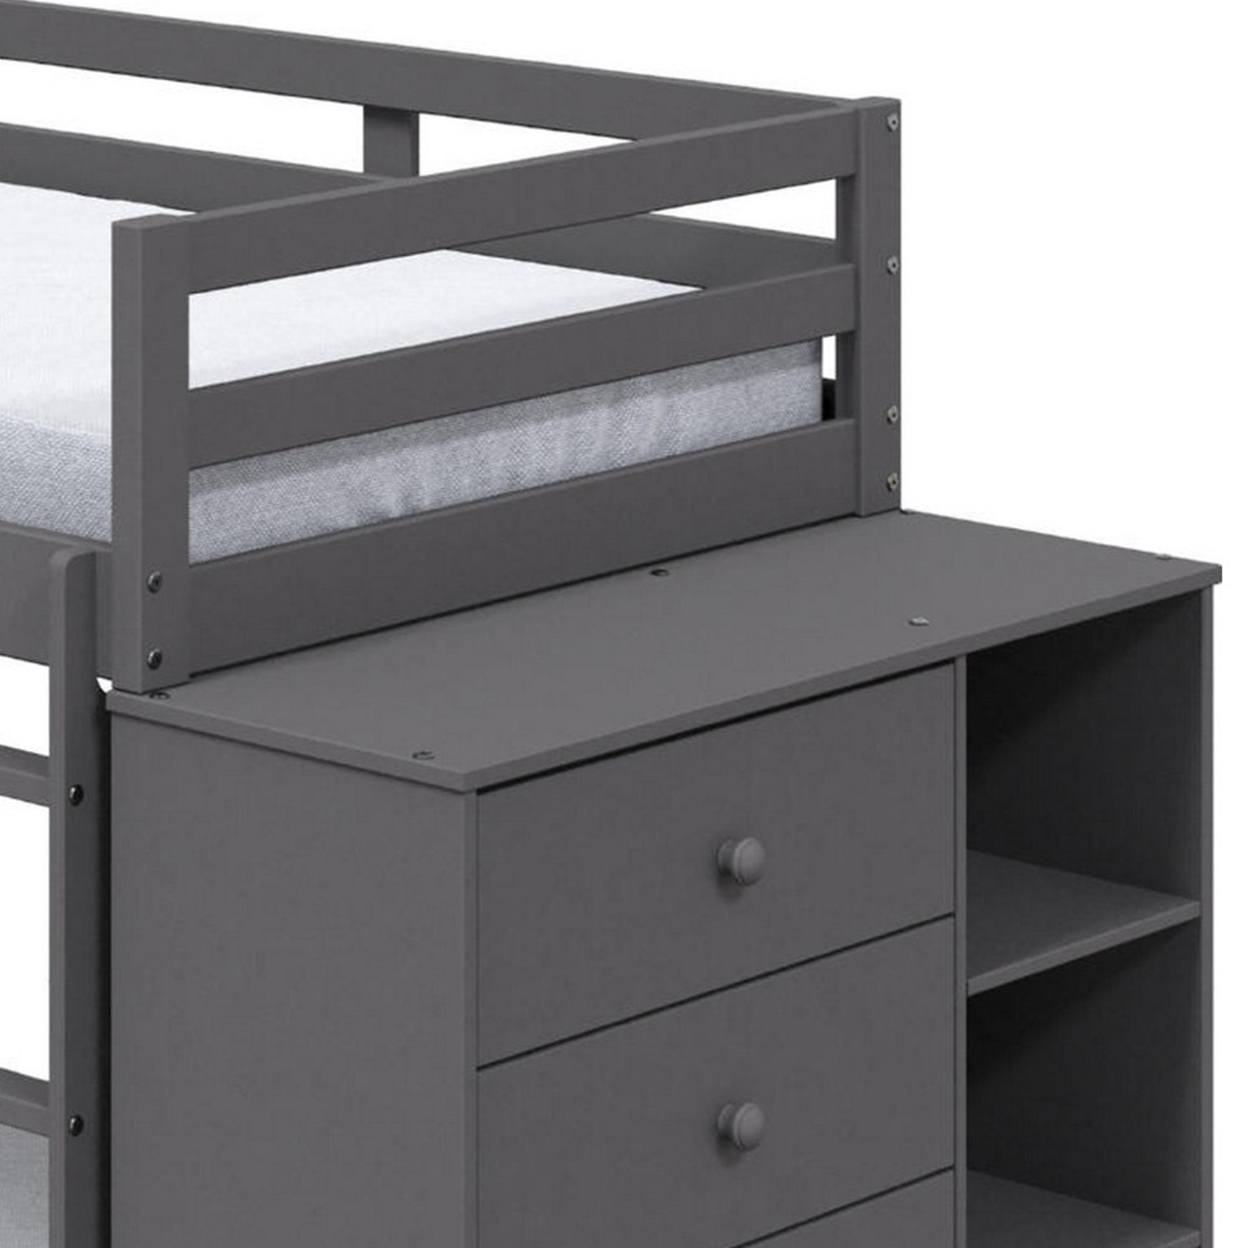 Classic Twin Bunk Bed With Cabinet, 4 Drawers, 3 Compartments, Ladder, Gray- Saltoro Sherpi